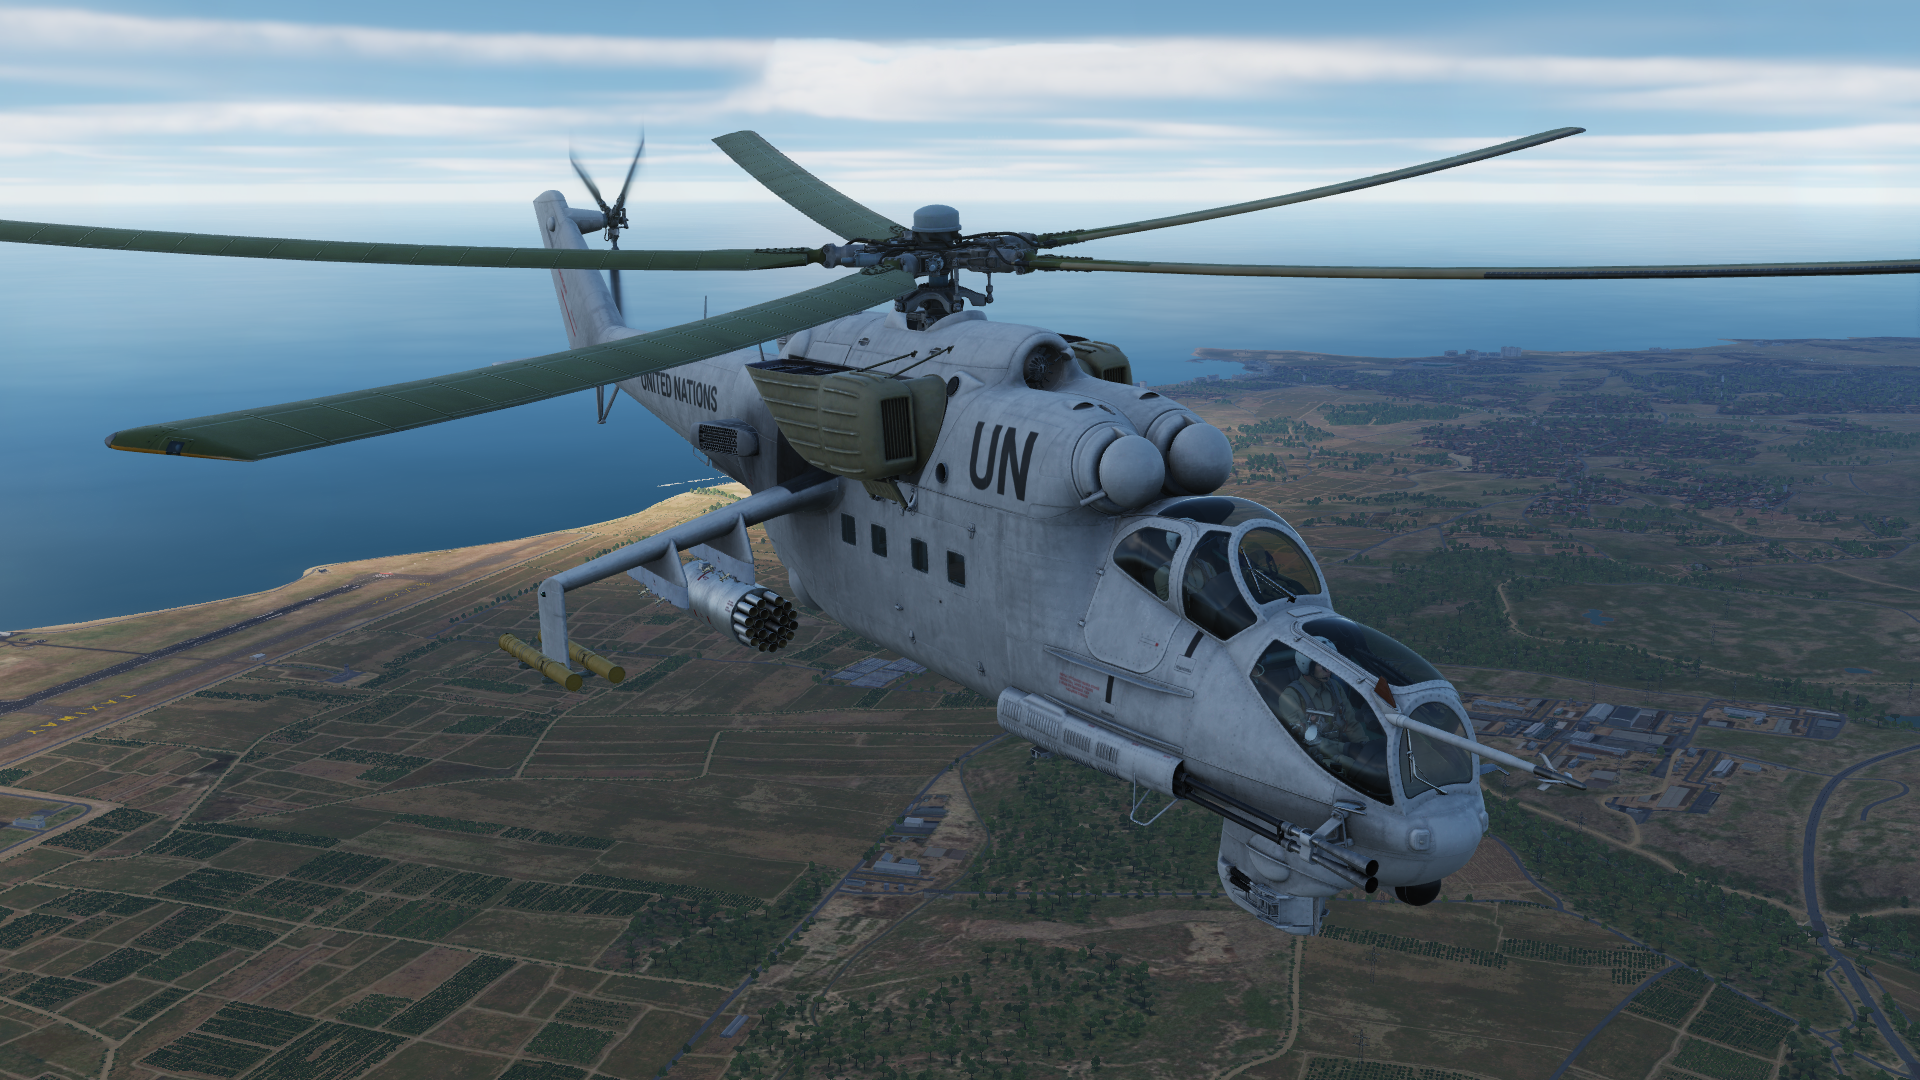 General 1920x1080 Digital Combat Simulator video games aircraft helicopters Mil Mi-24 screen shot United Nations sky water